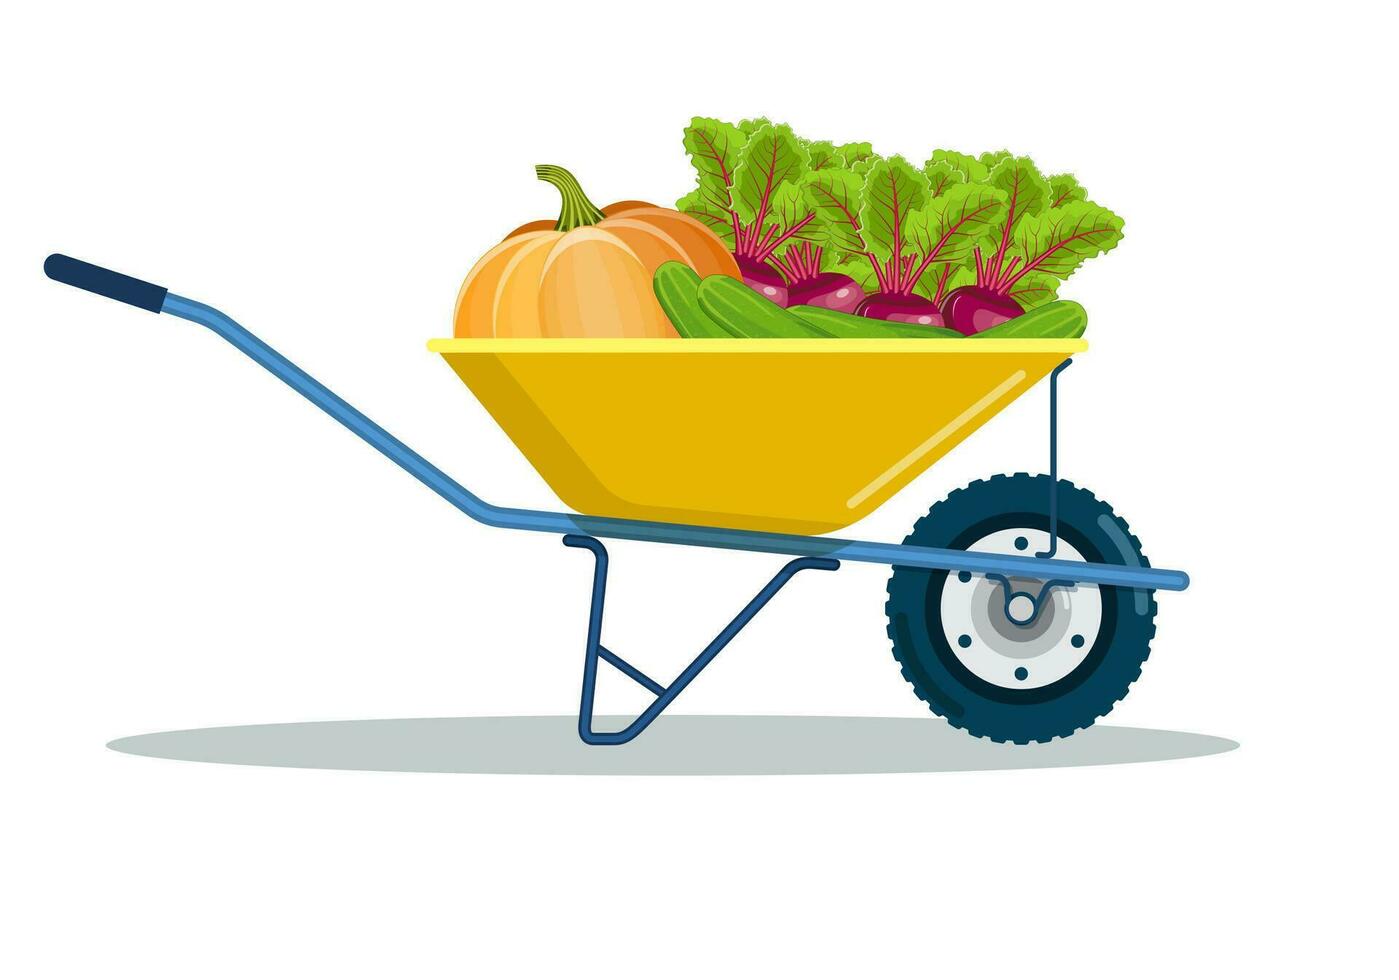 Garden cart with beetroot, pumpkin, cucumber. Natural and tasty food. Organic farm products. Metal wheelbarrow full of ripe vegetables. Vector illustration in flat style